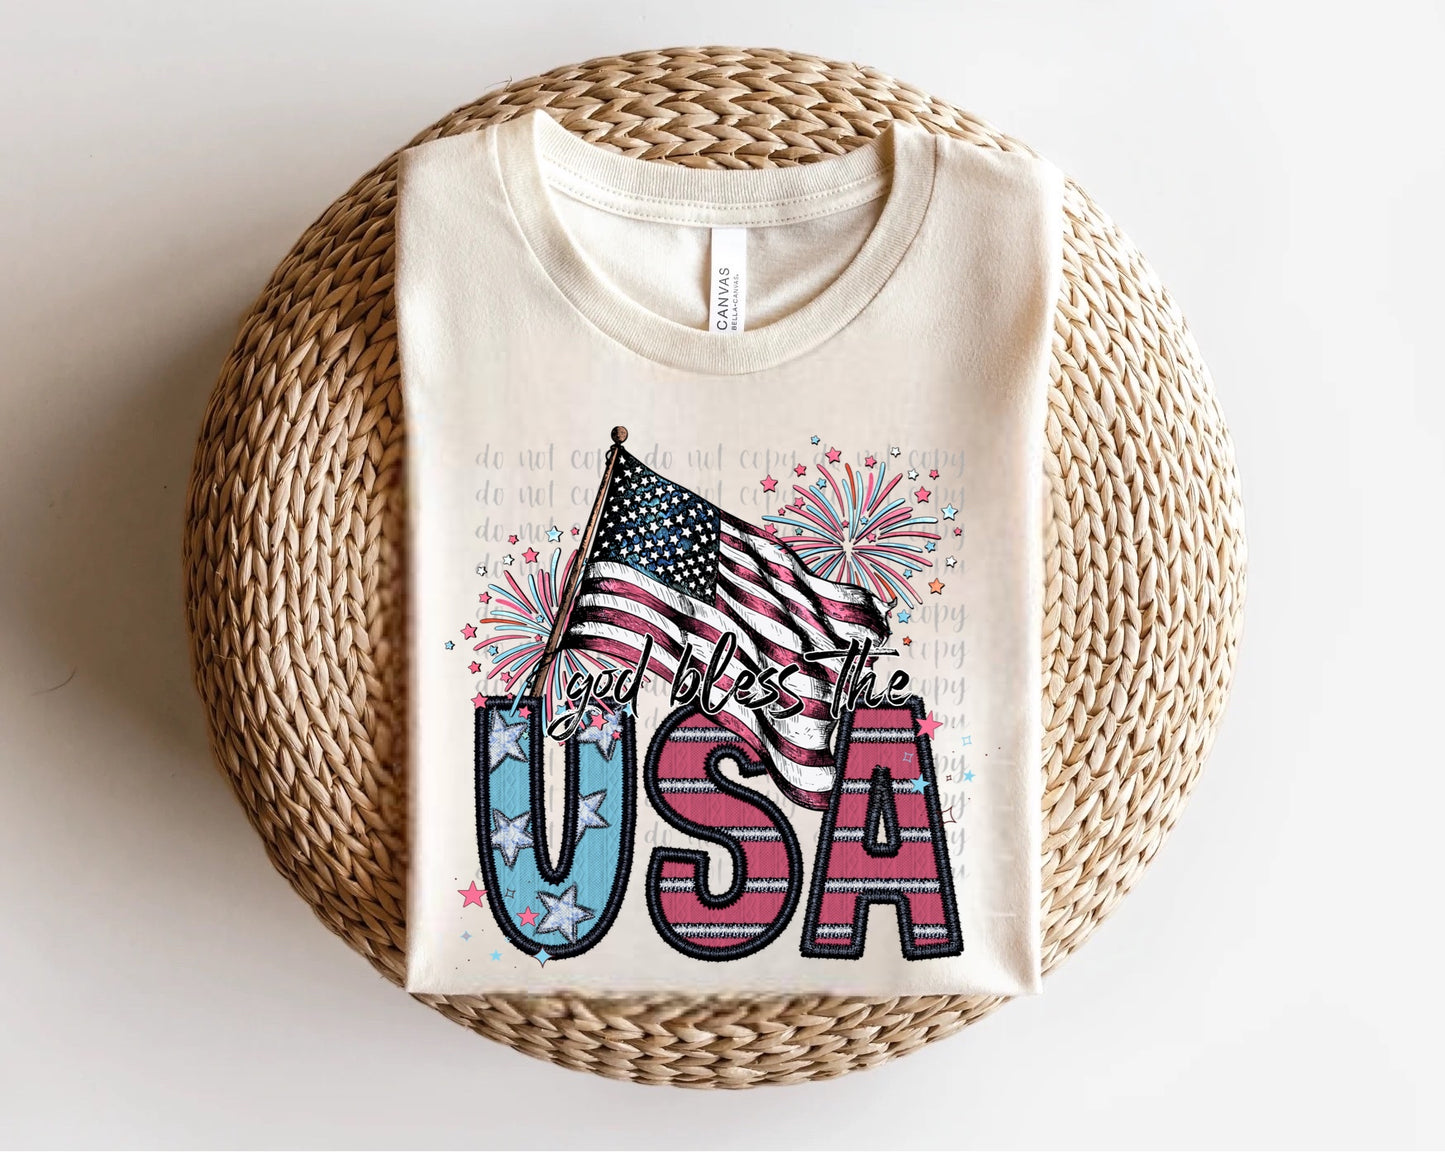 God Bless the USA Embroidered Direct to Film Transfer